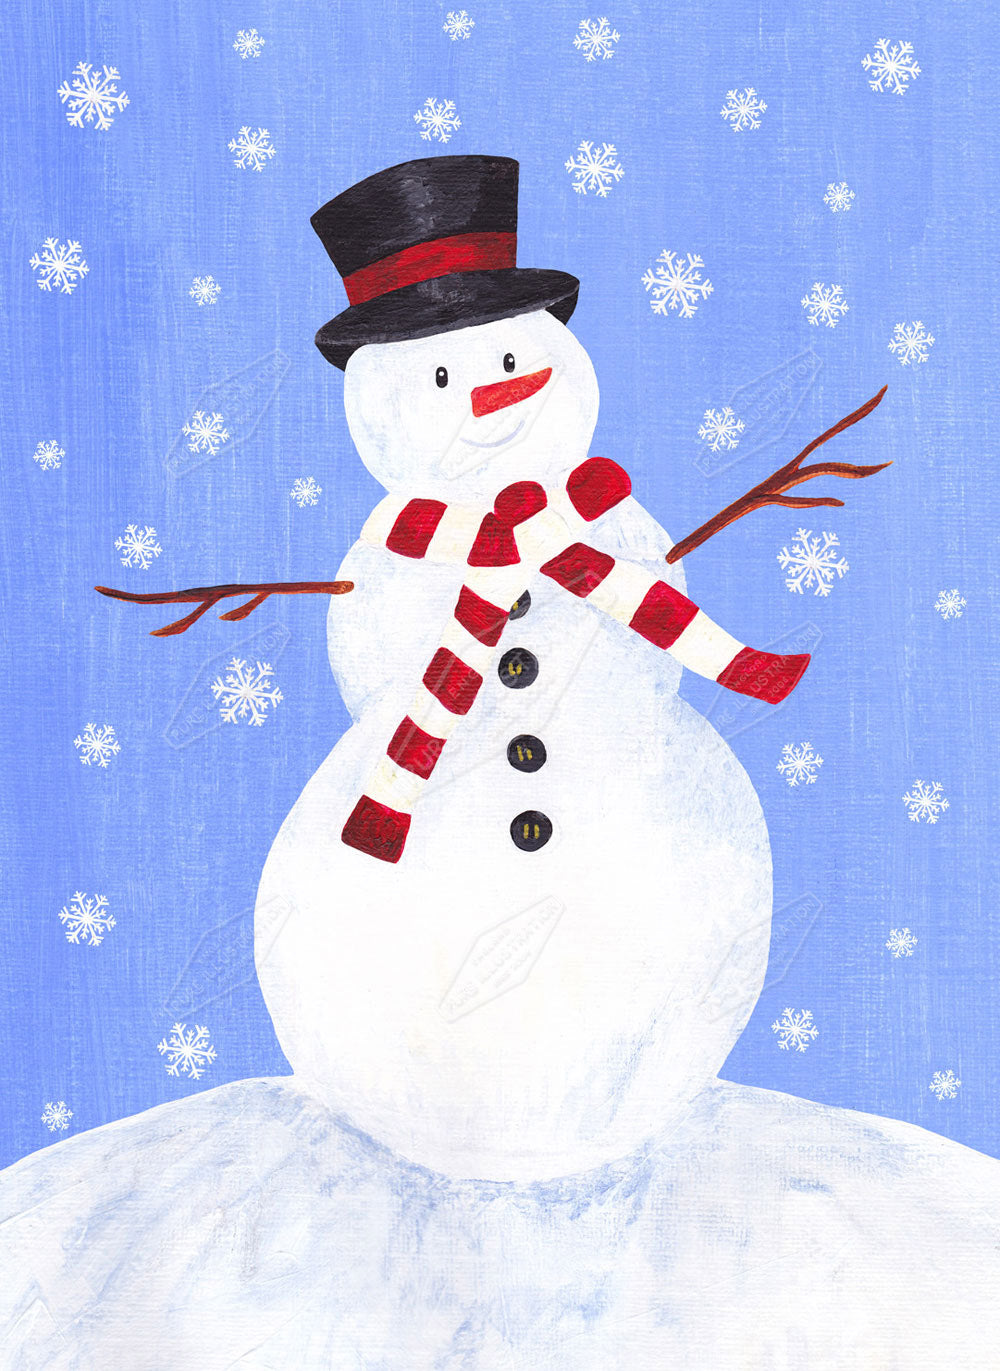 00019776SSN- Sian Summerhayes is represented by Pure Art Licensing Agency - Christmas Greeting Card Design